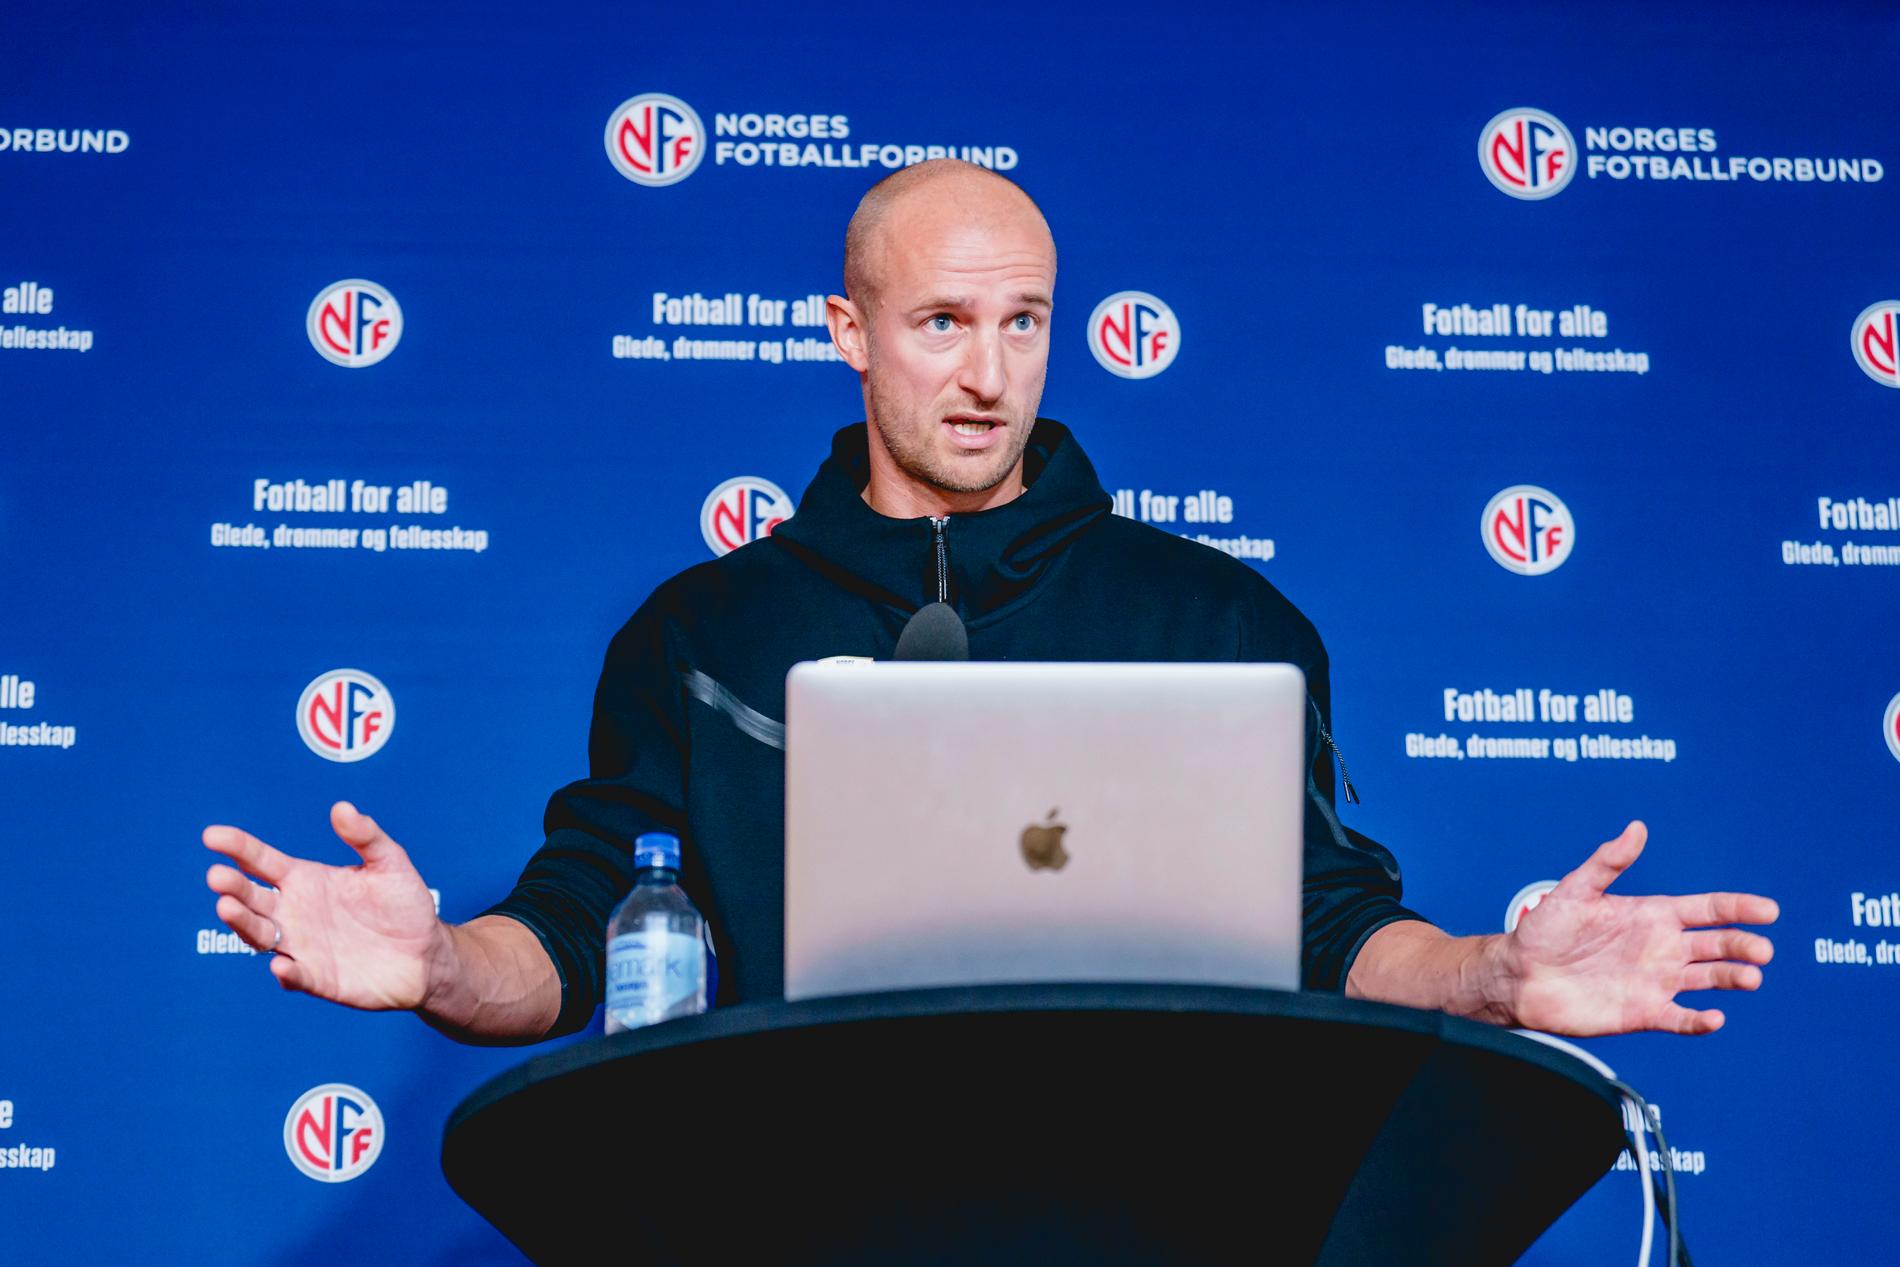 Bryde Hangeland, chairman of the committee, presented the proposals to Norwegian football and the press last week.